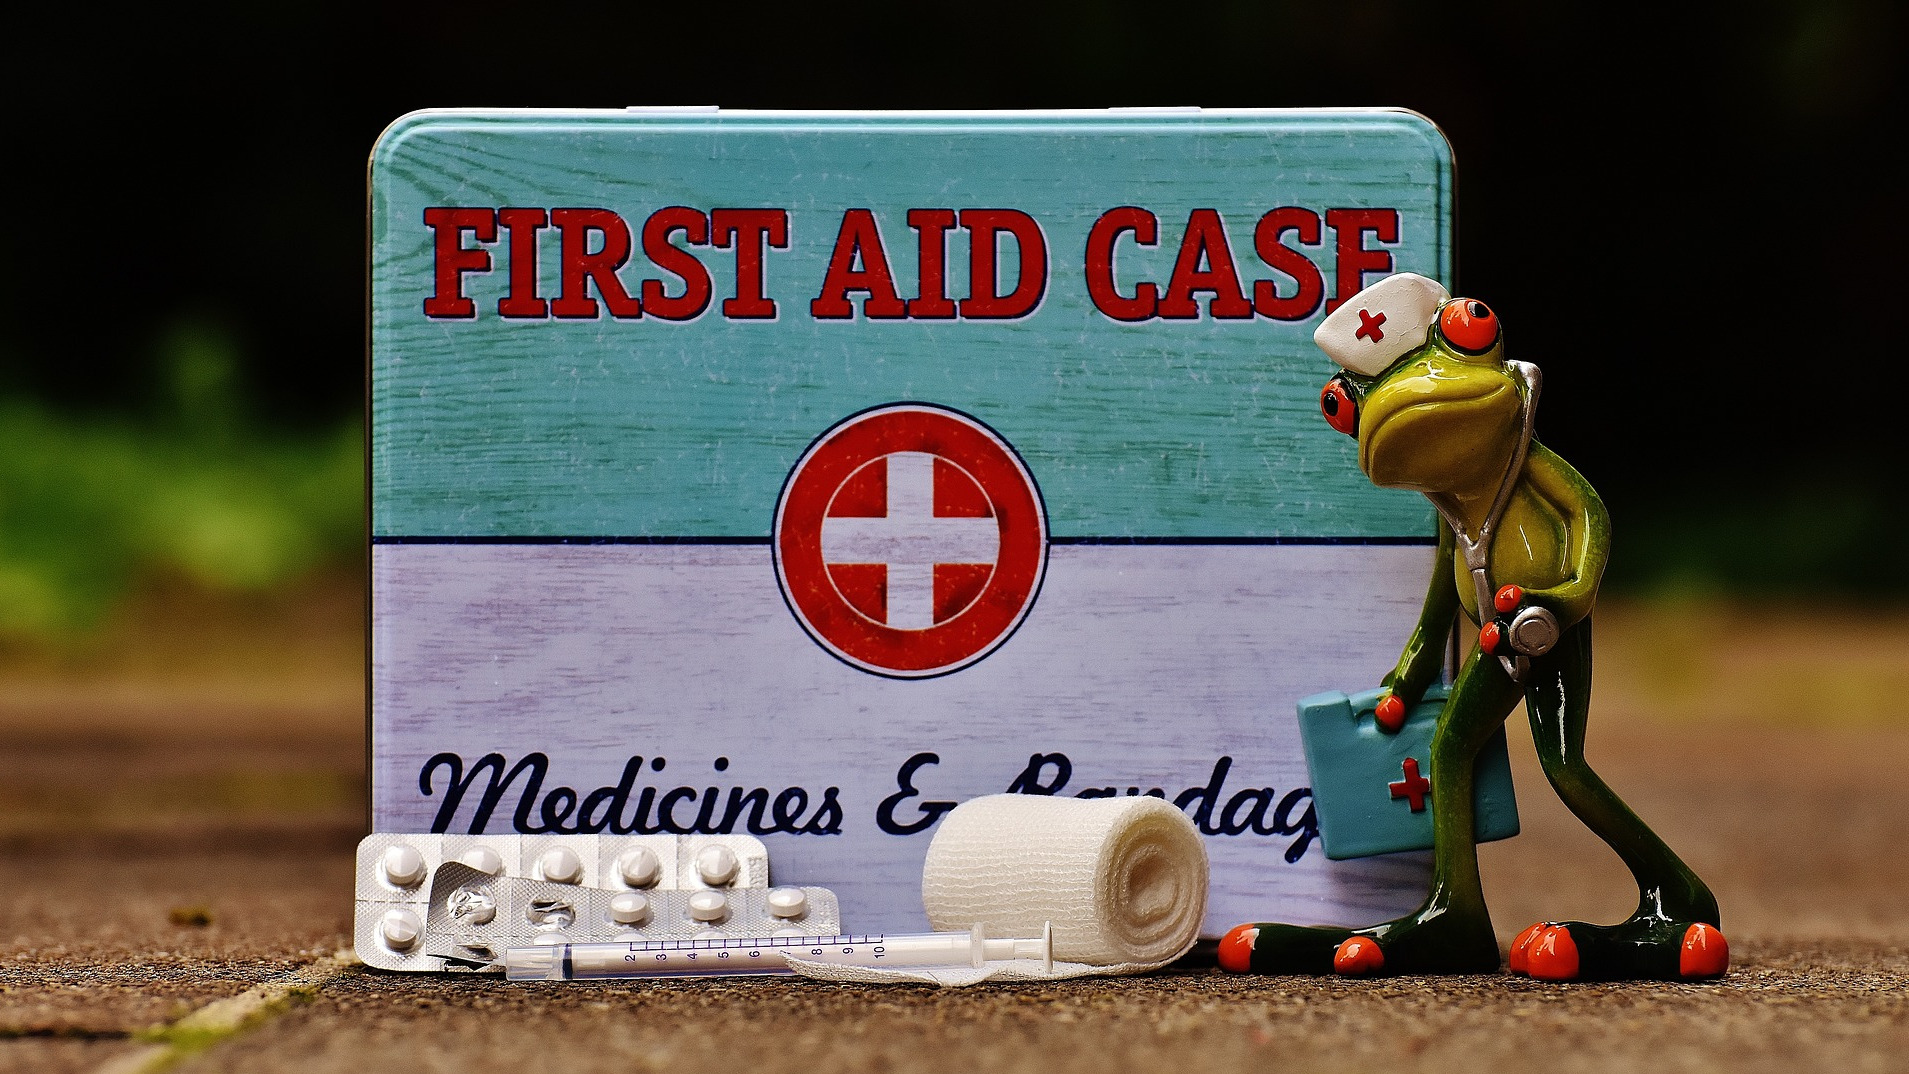 Frog dressed as a doctor standing next to first aid case.